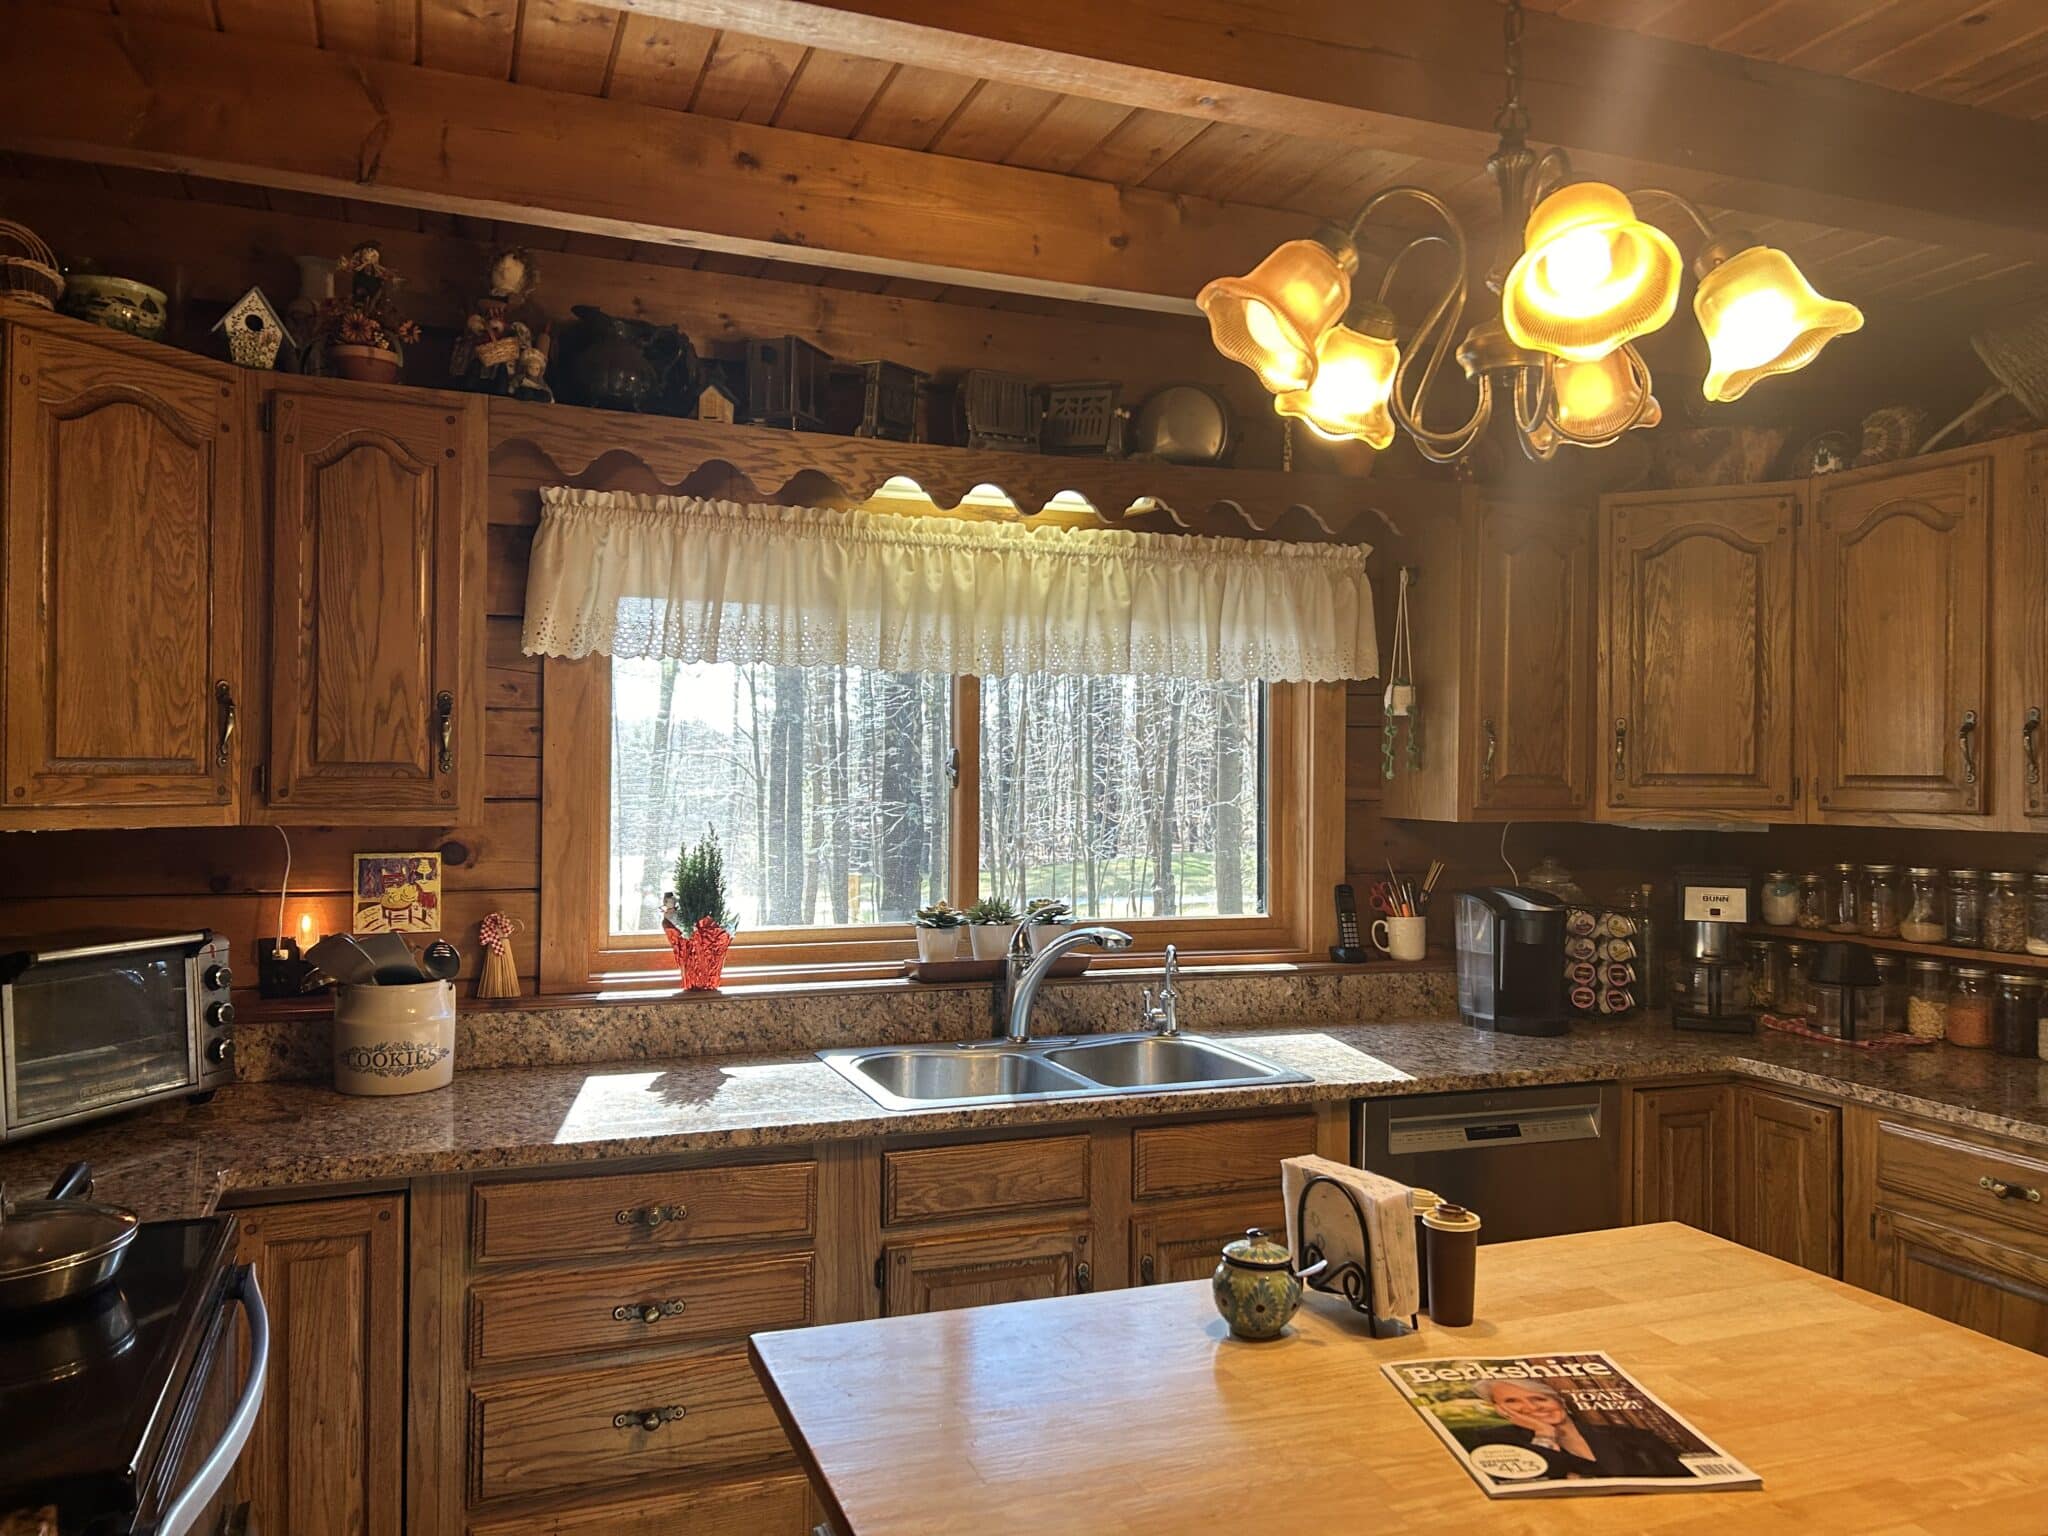 The kitchen has wood cabinets, butcherblock island and a view out the large window of the forest.